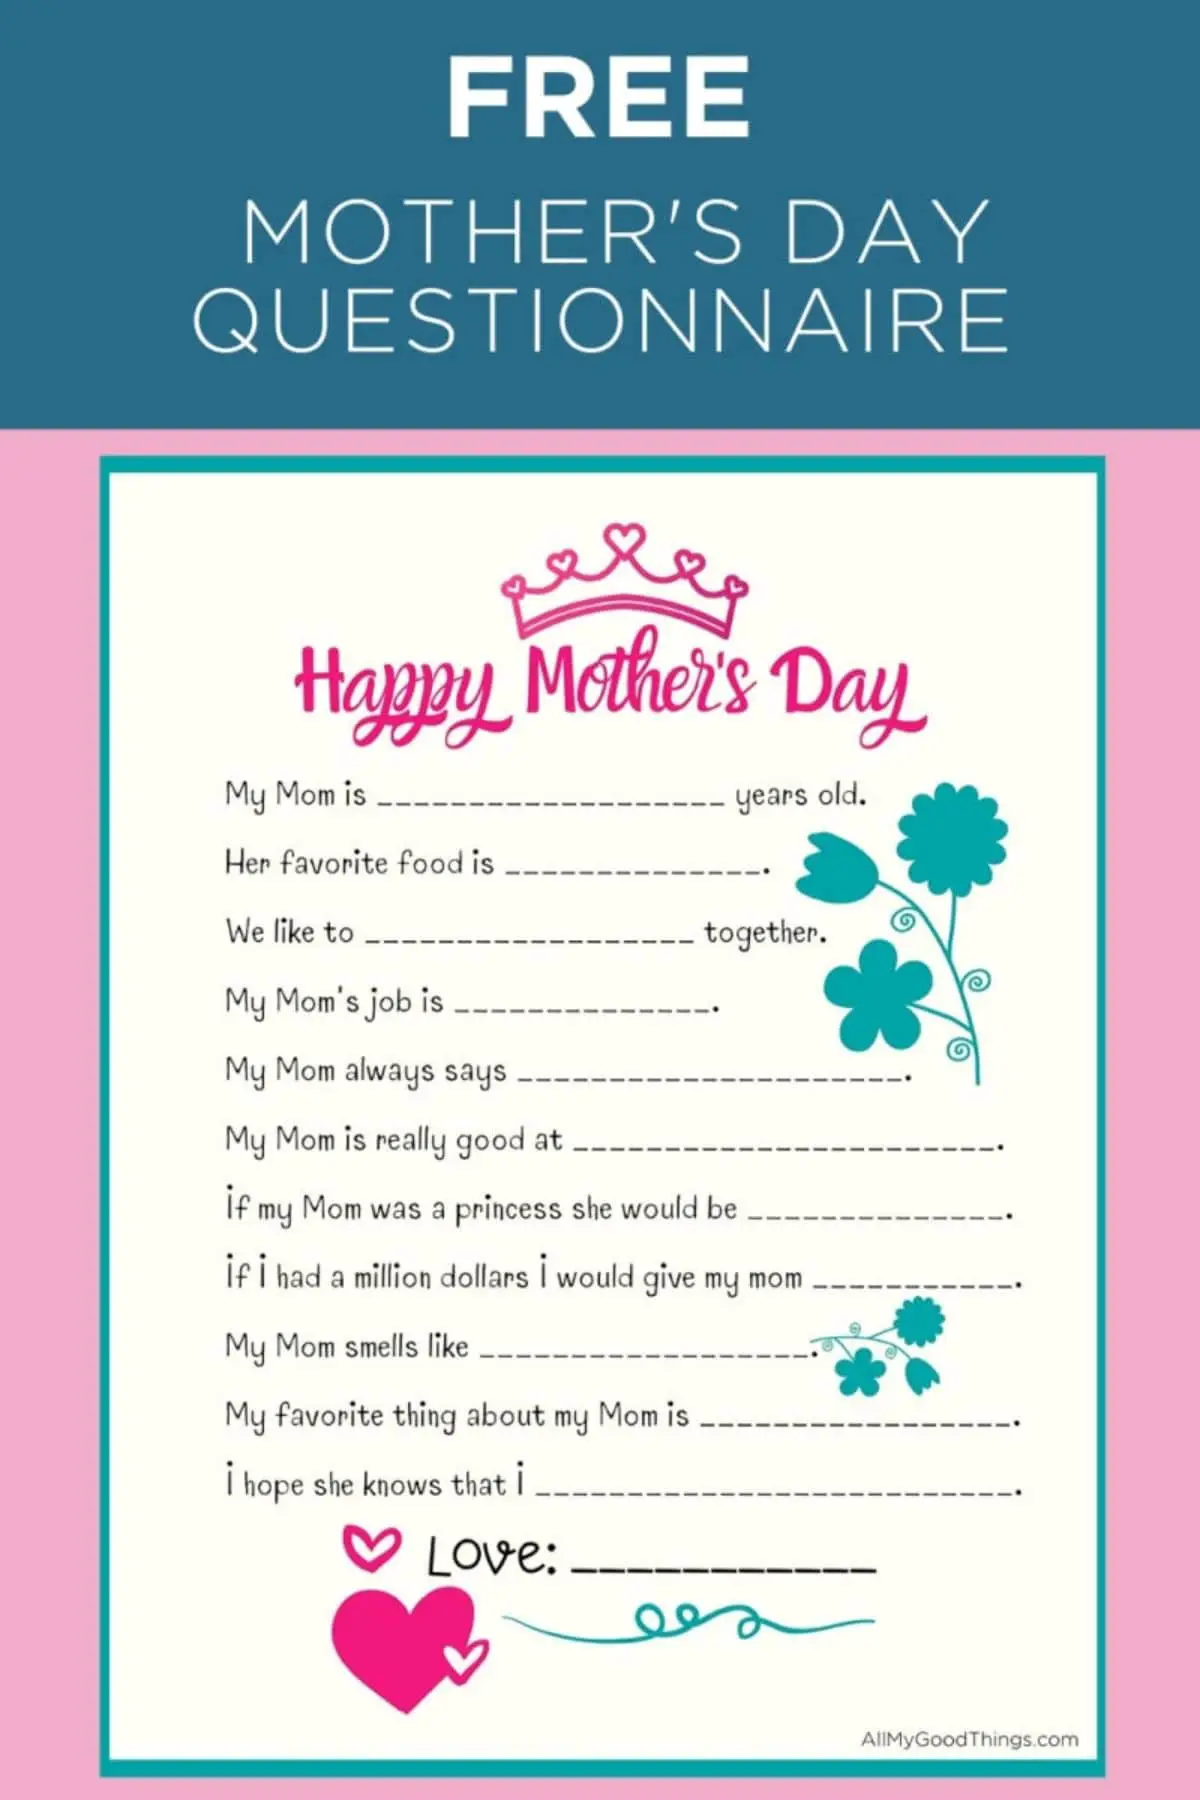 mother's day questionnaire